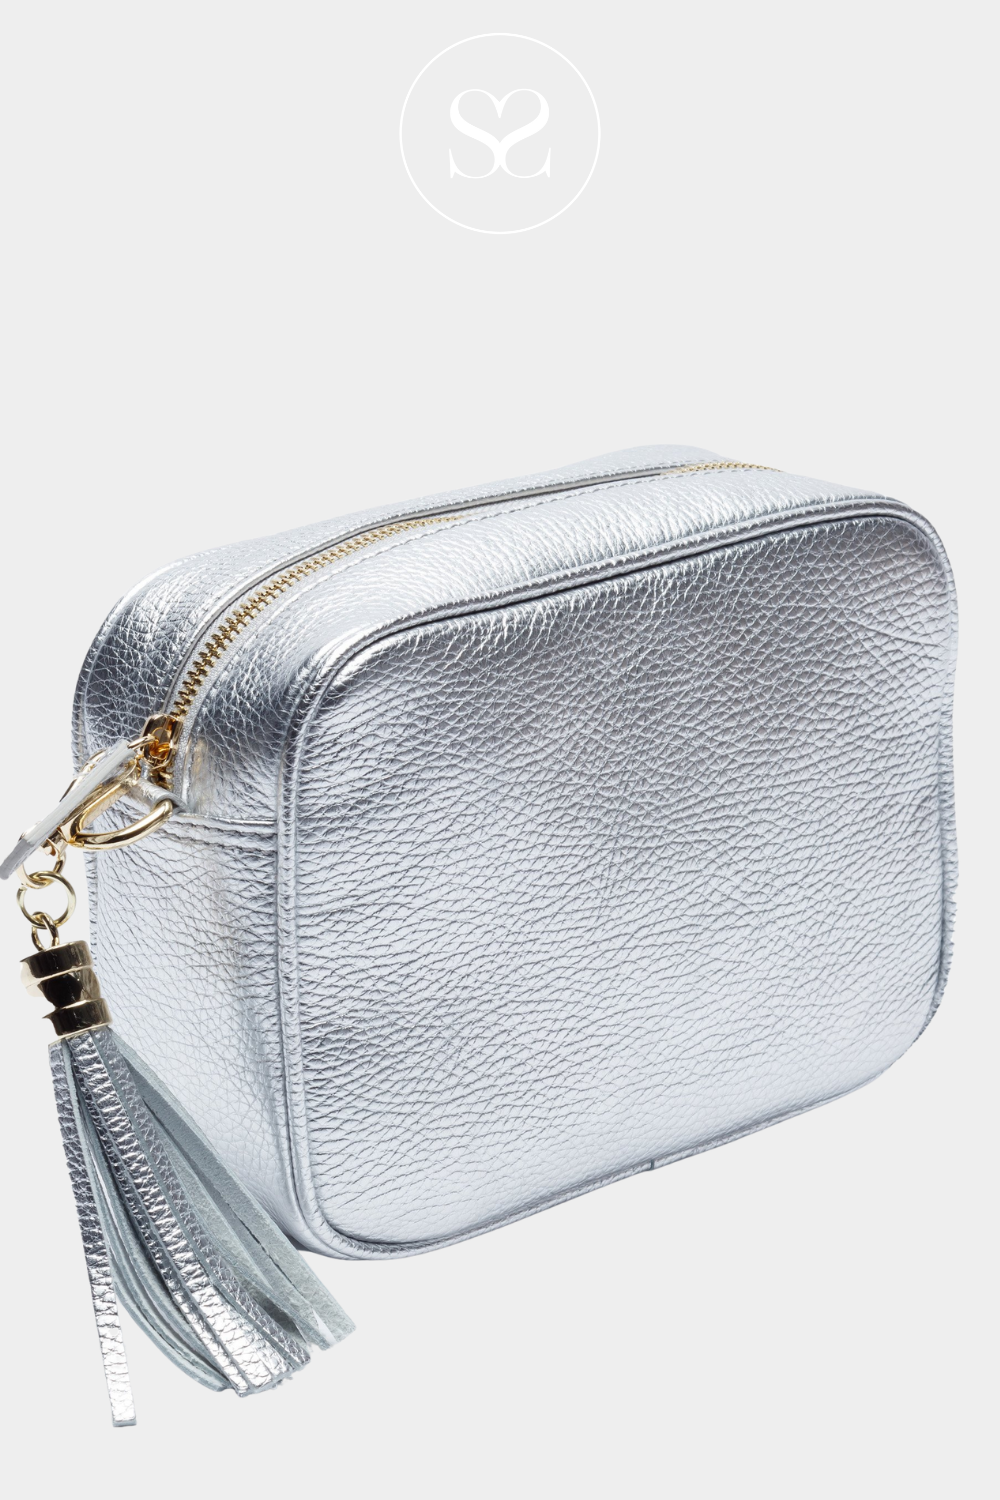 ELIE BEAUMONT SILVER CROSSBODY LEATHER BAG WITH TASSLE AND GOLD ZIP